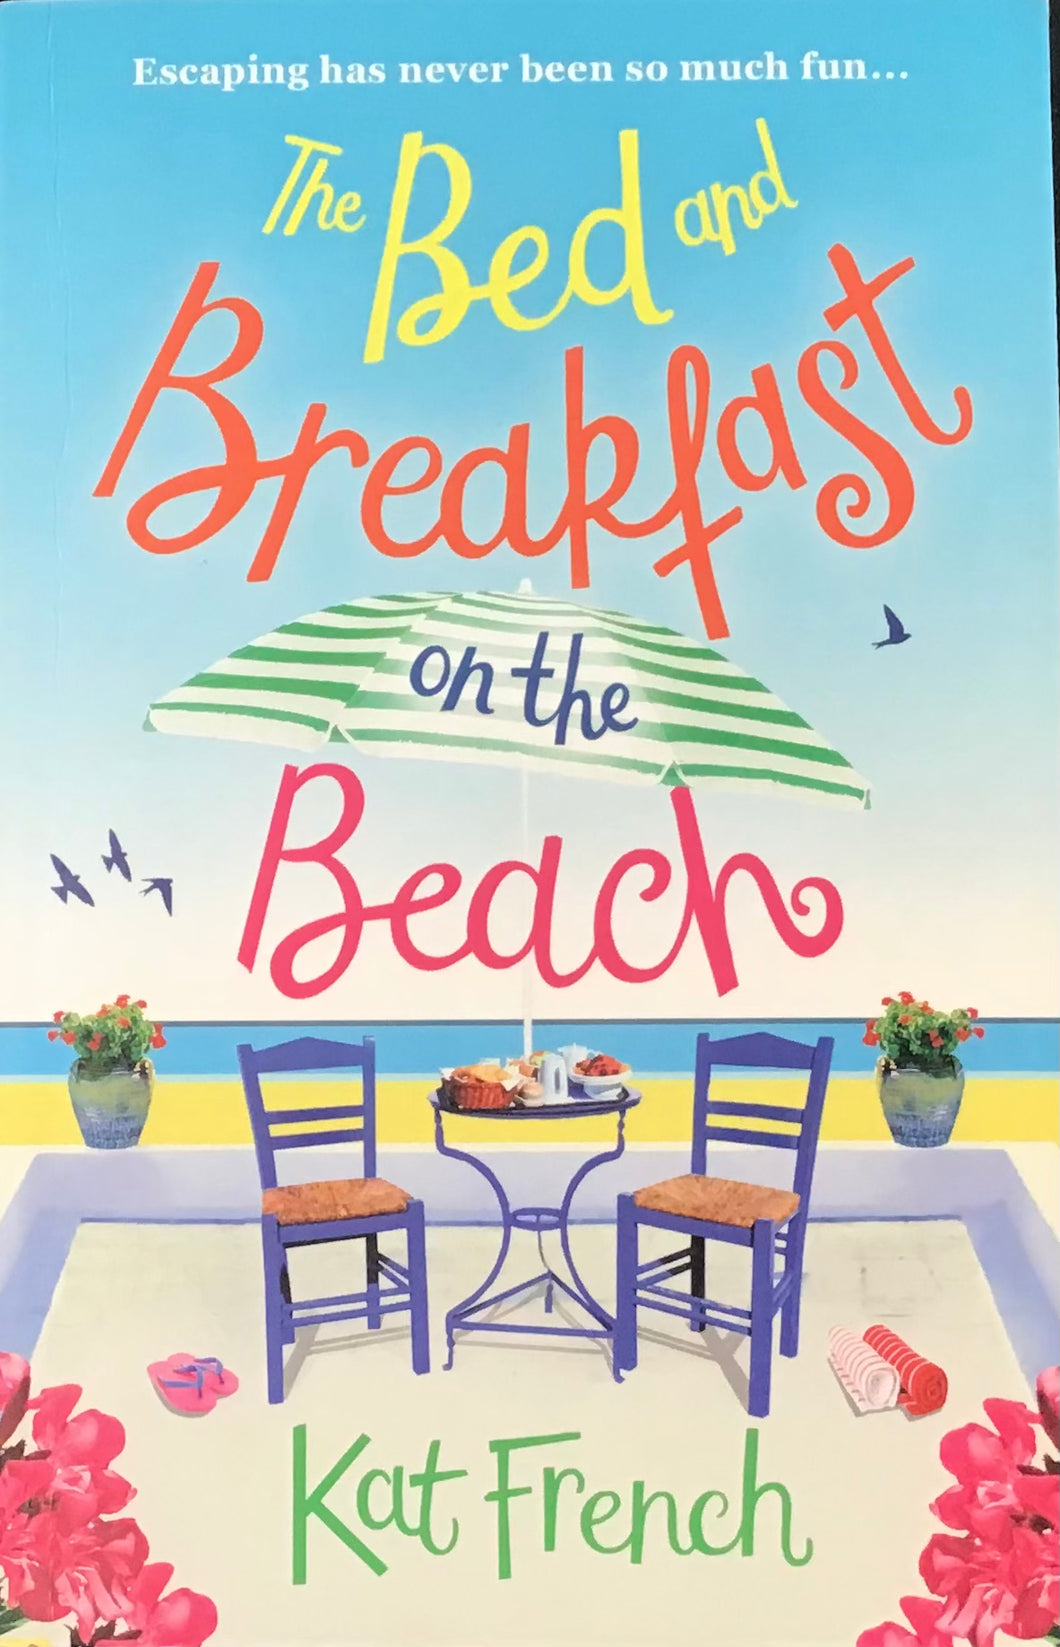 The Bed and Breakfast on the Beach, Kat French